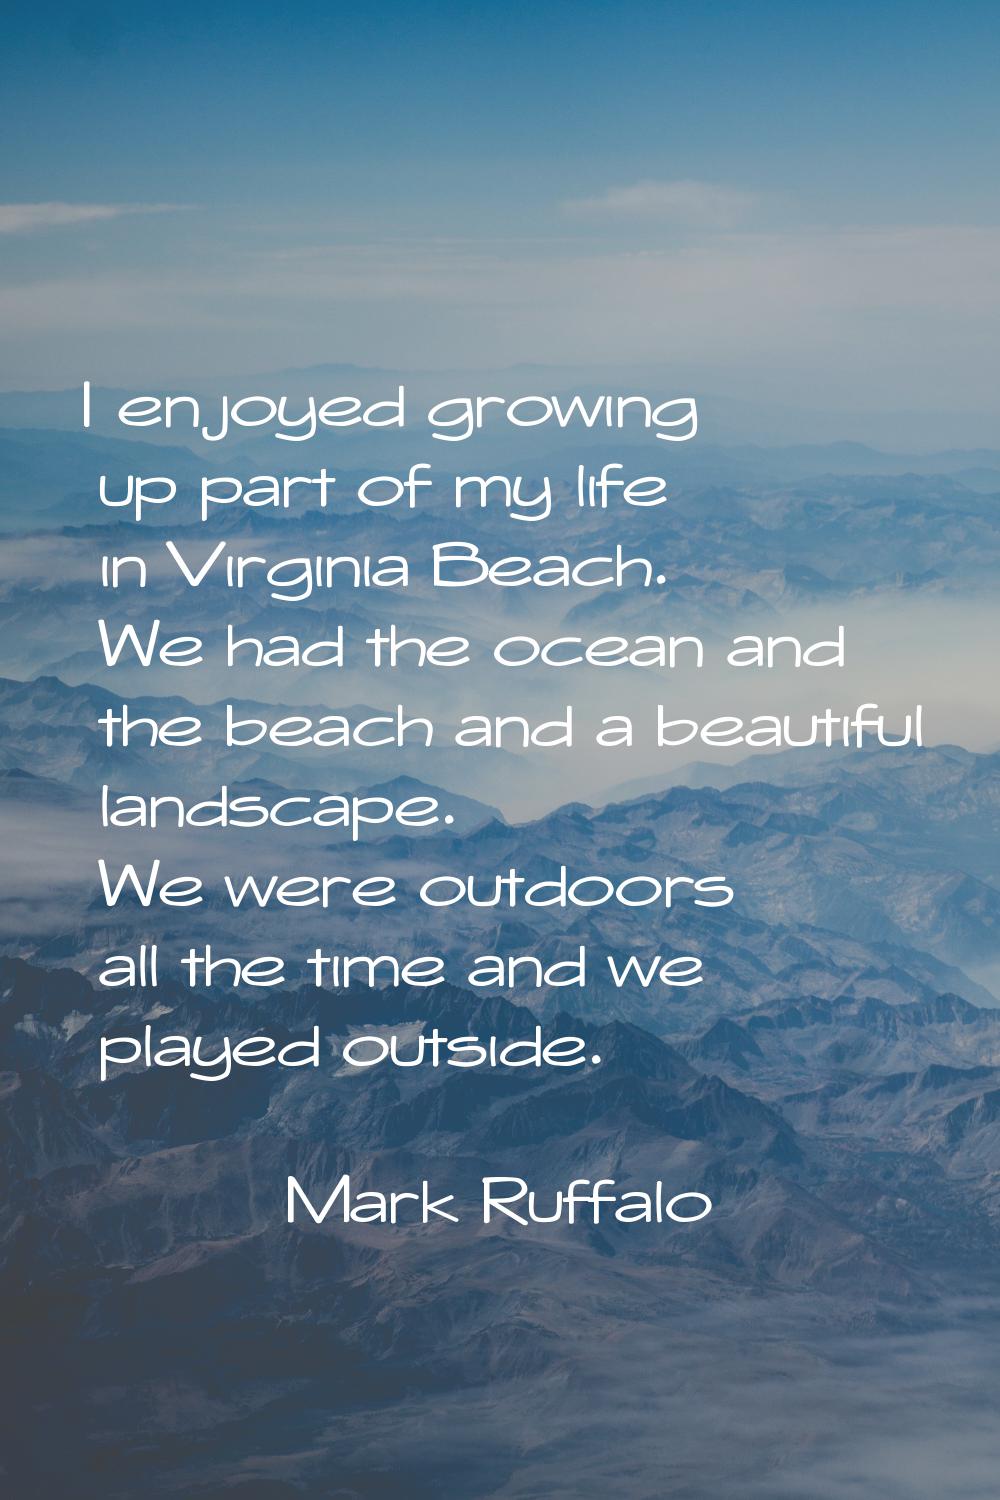 I enjoyed growing up part of my life in Virginia Beach. We had the ocean and the beach and a beauti